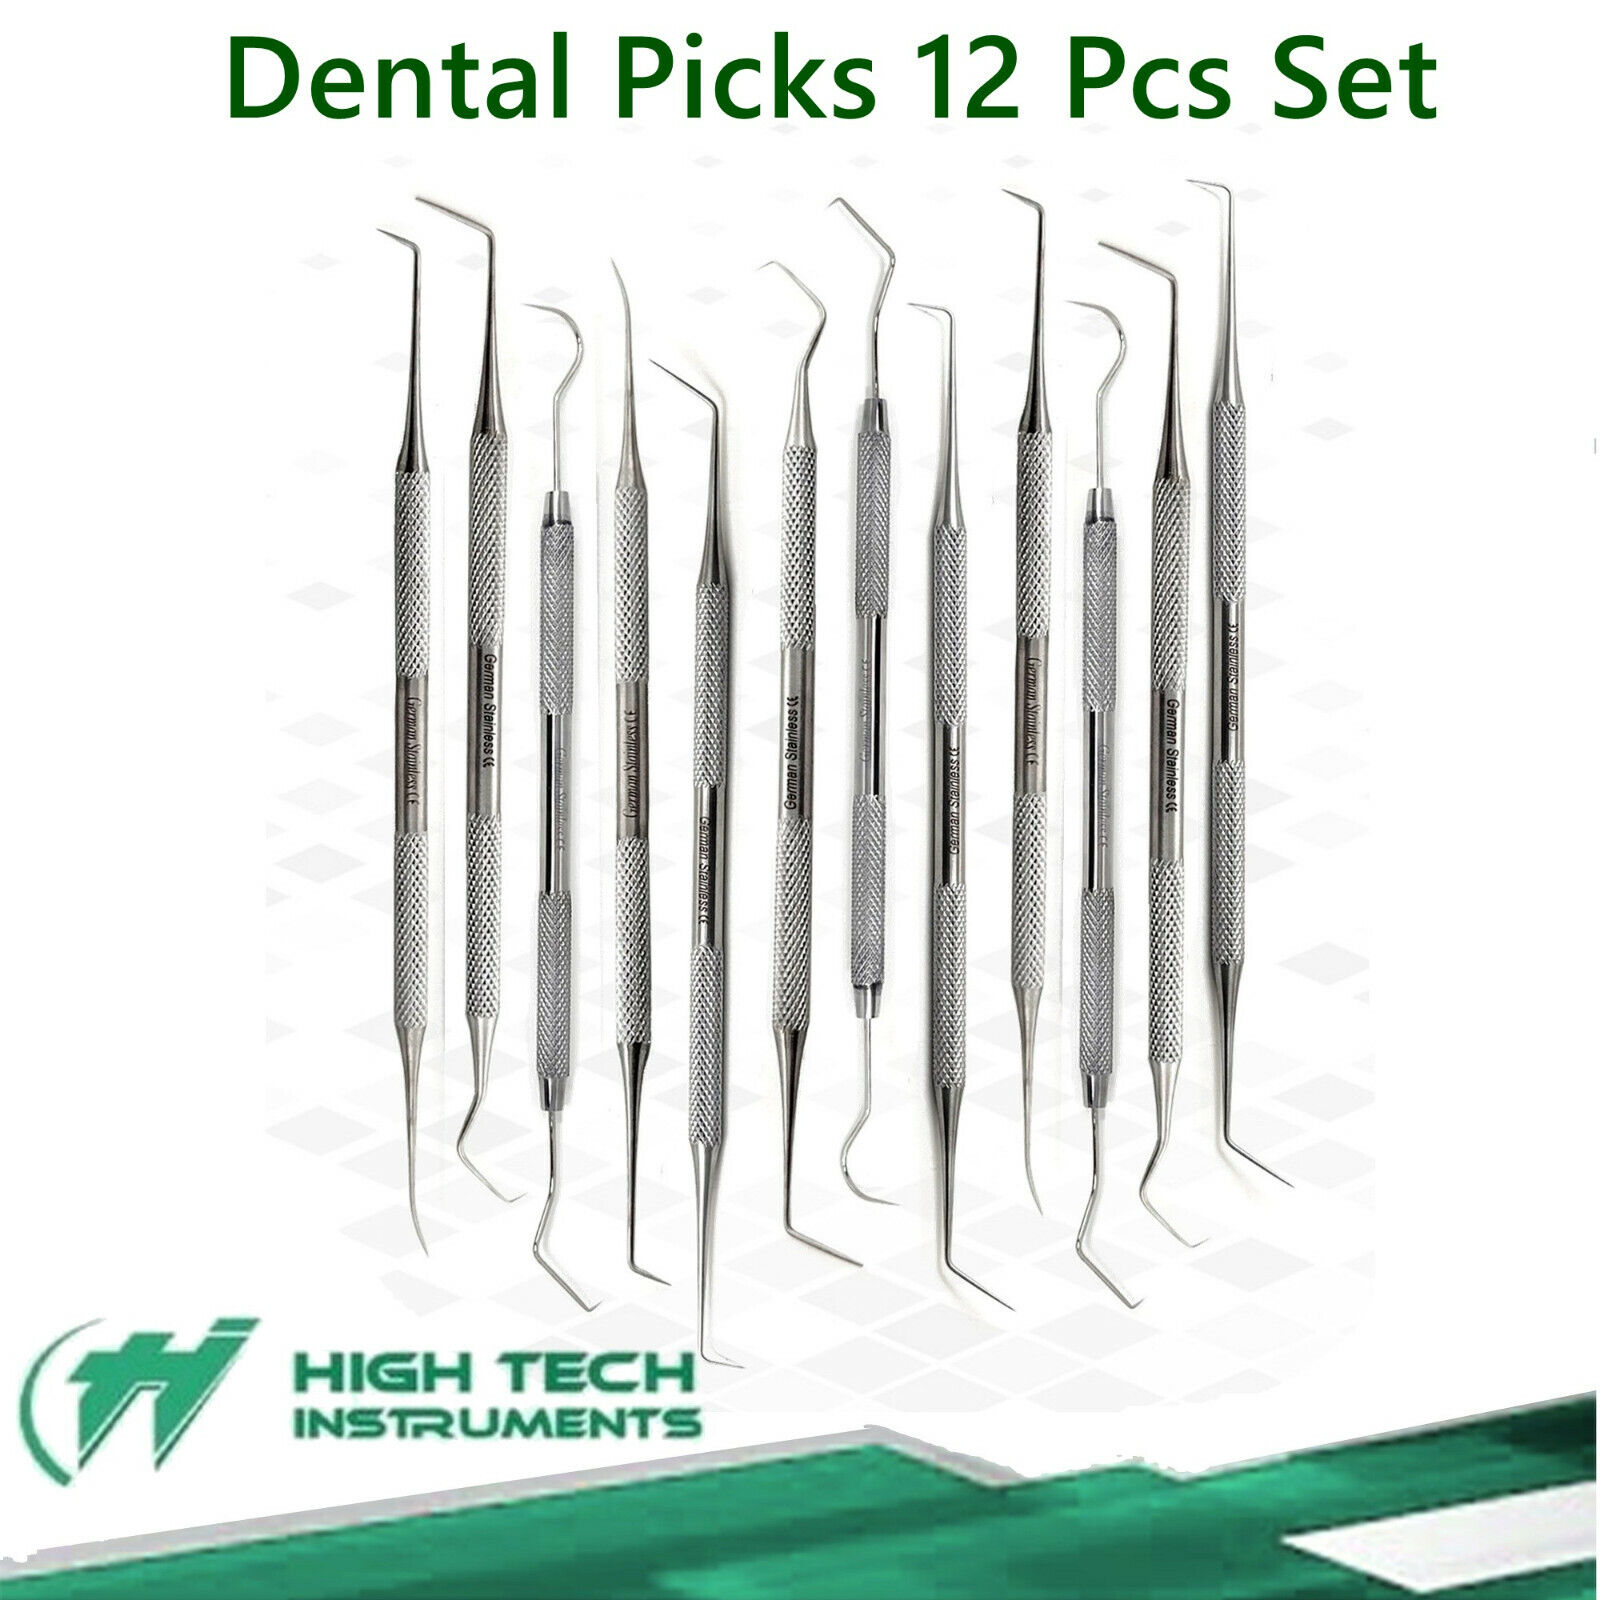 12pc STAINLESS STEEL Dental PICK SET, Tools Pick Scaler Teeth Cleaning Tooth hti brand Does Not Apply